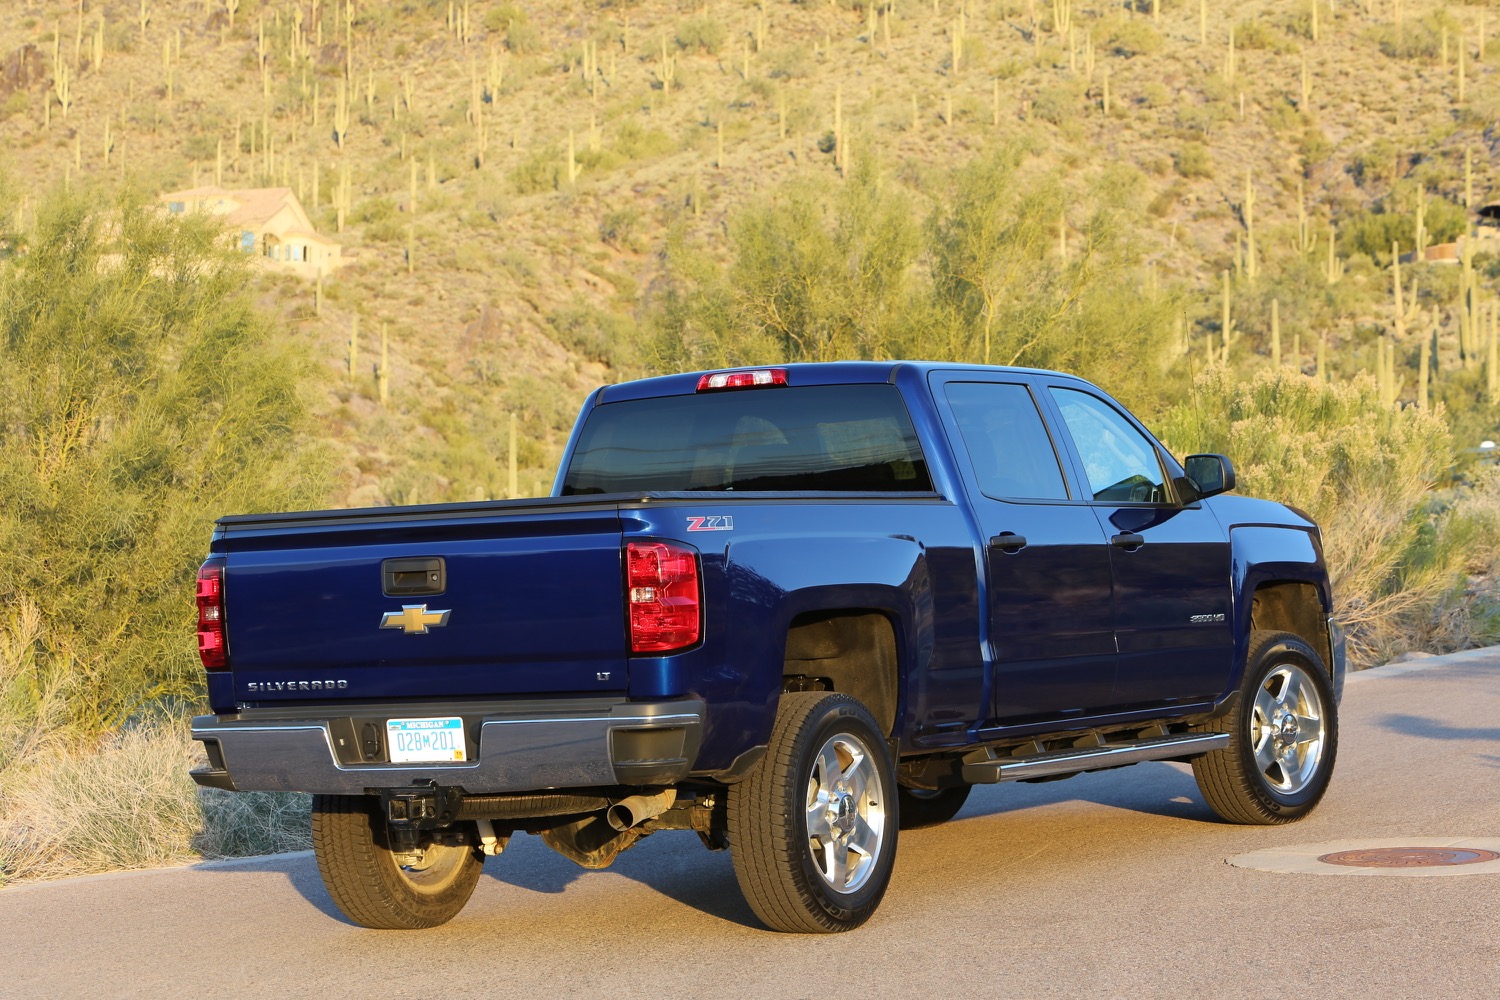 What are some good forums for discussing the Chevy 2500HD?